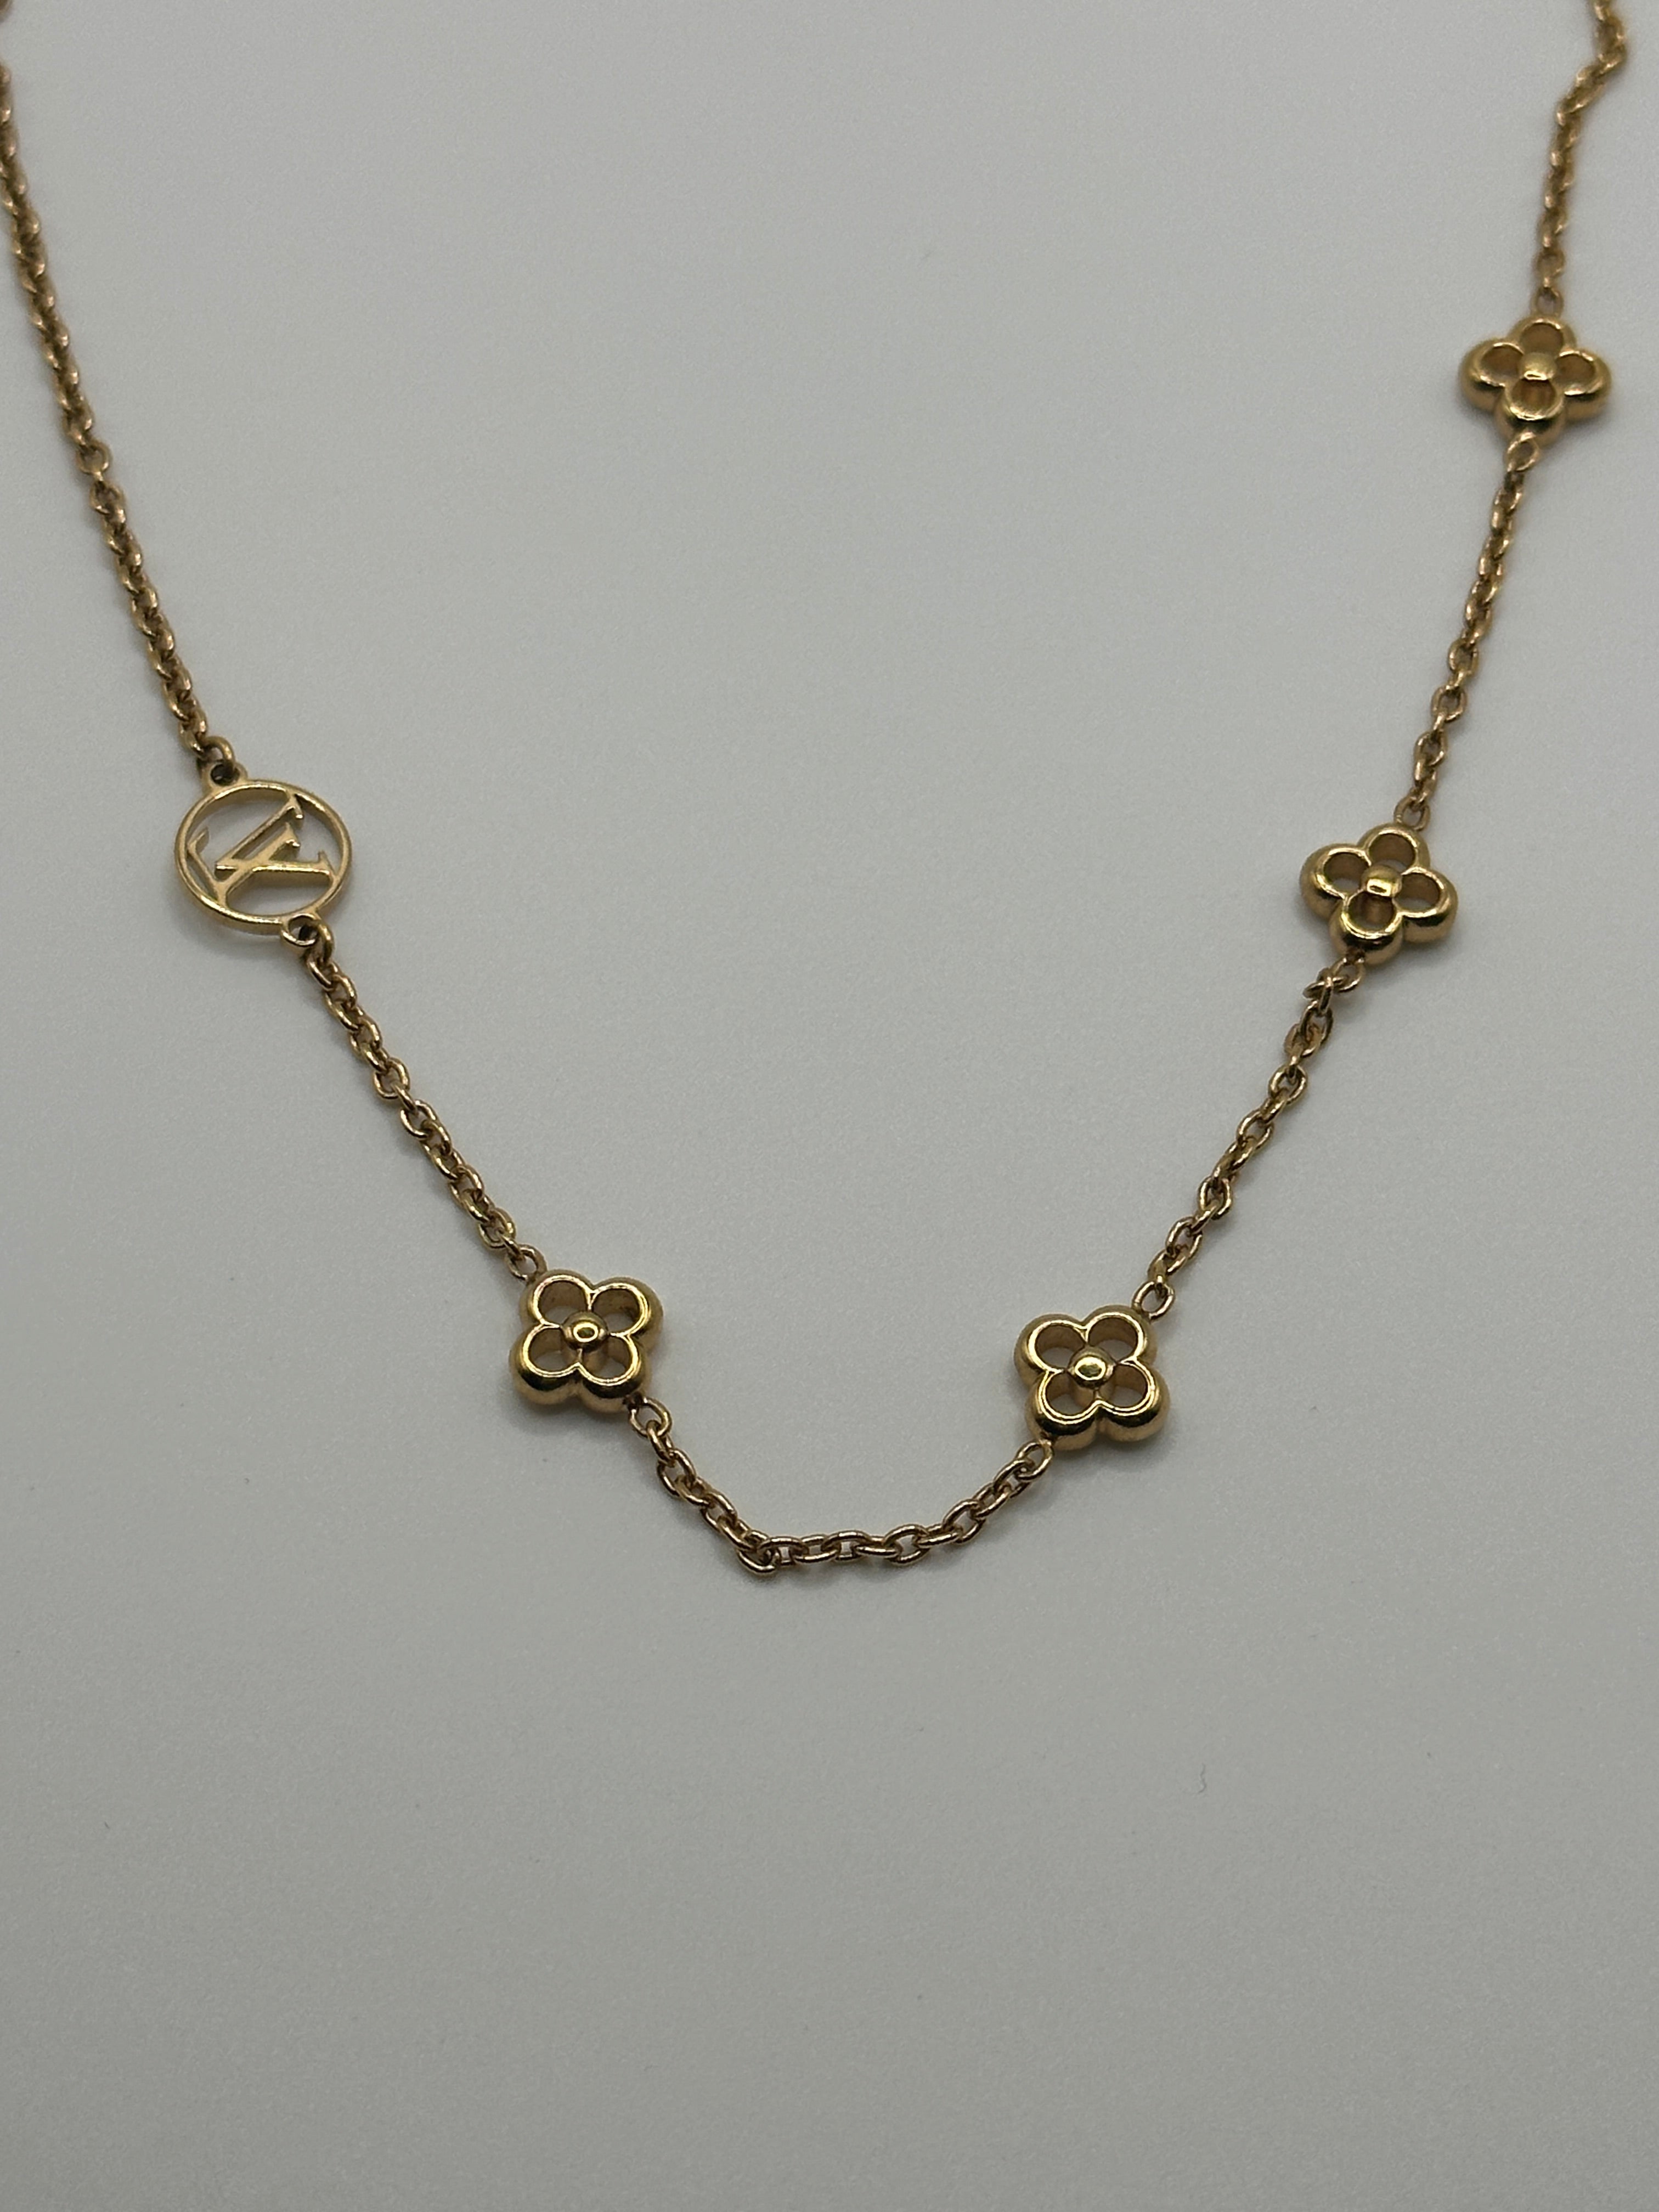 Other jewelry Louis Vuitton Long Necklace Flower Full Golden ref